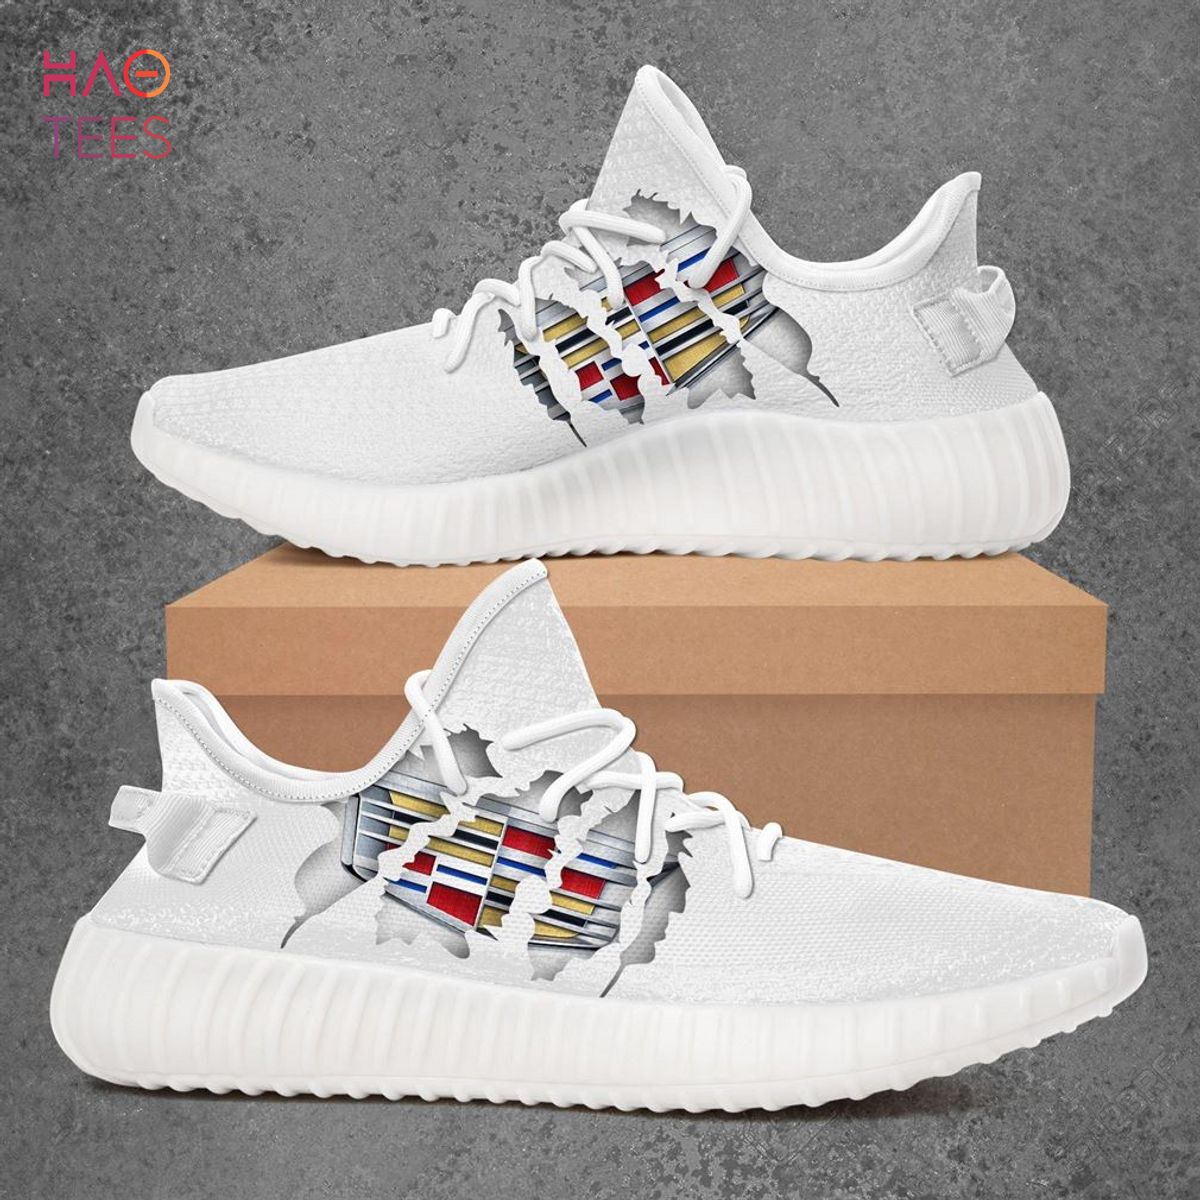 [TRENDDING] Cadillac Car Yeezy Sneakers Shoes White